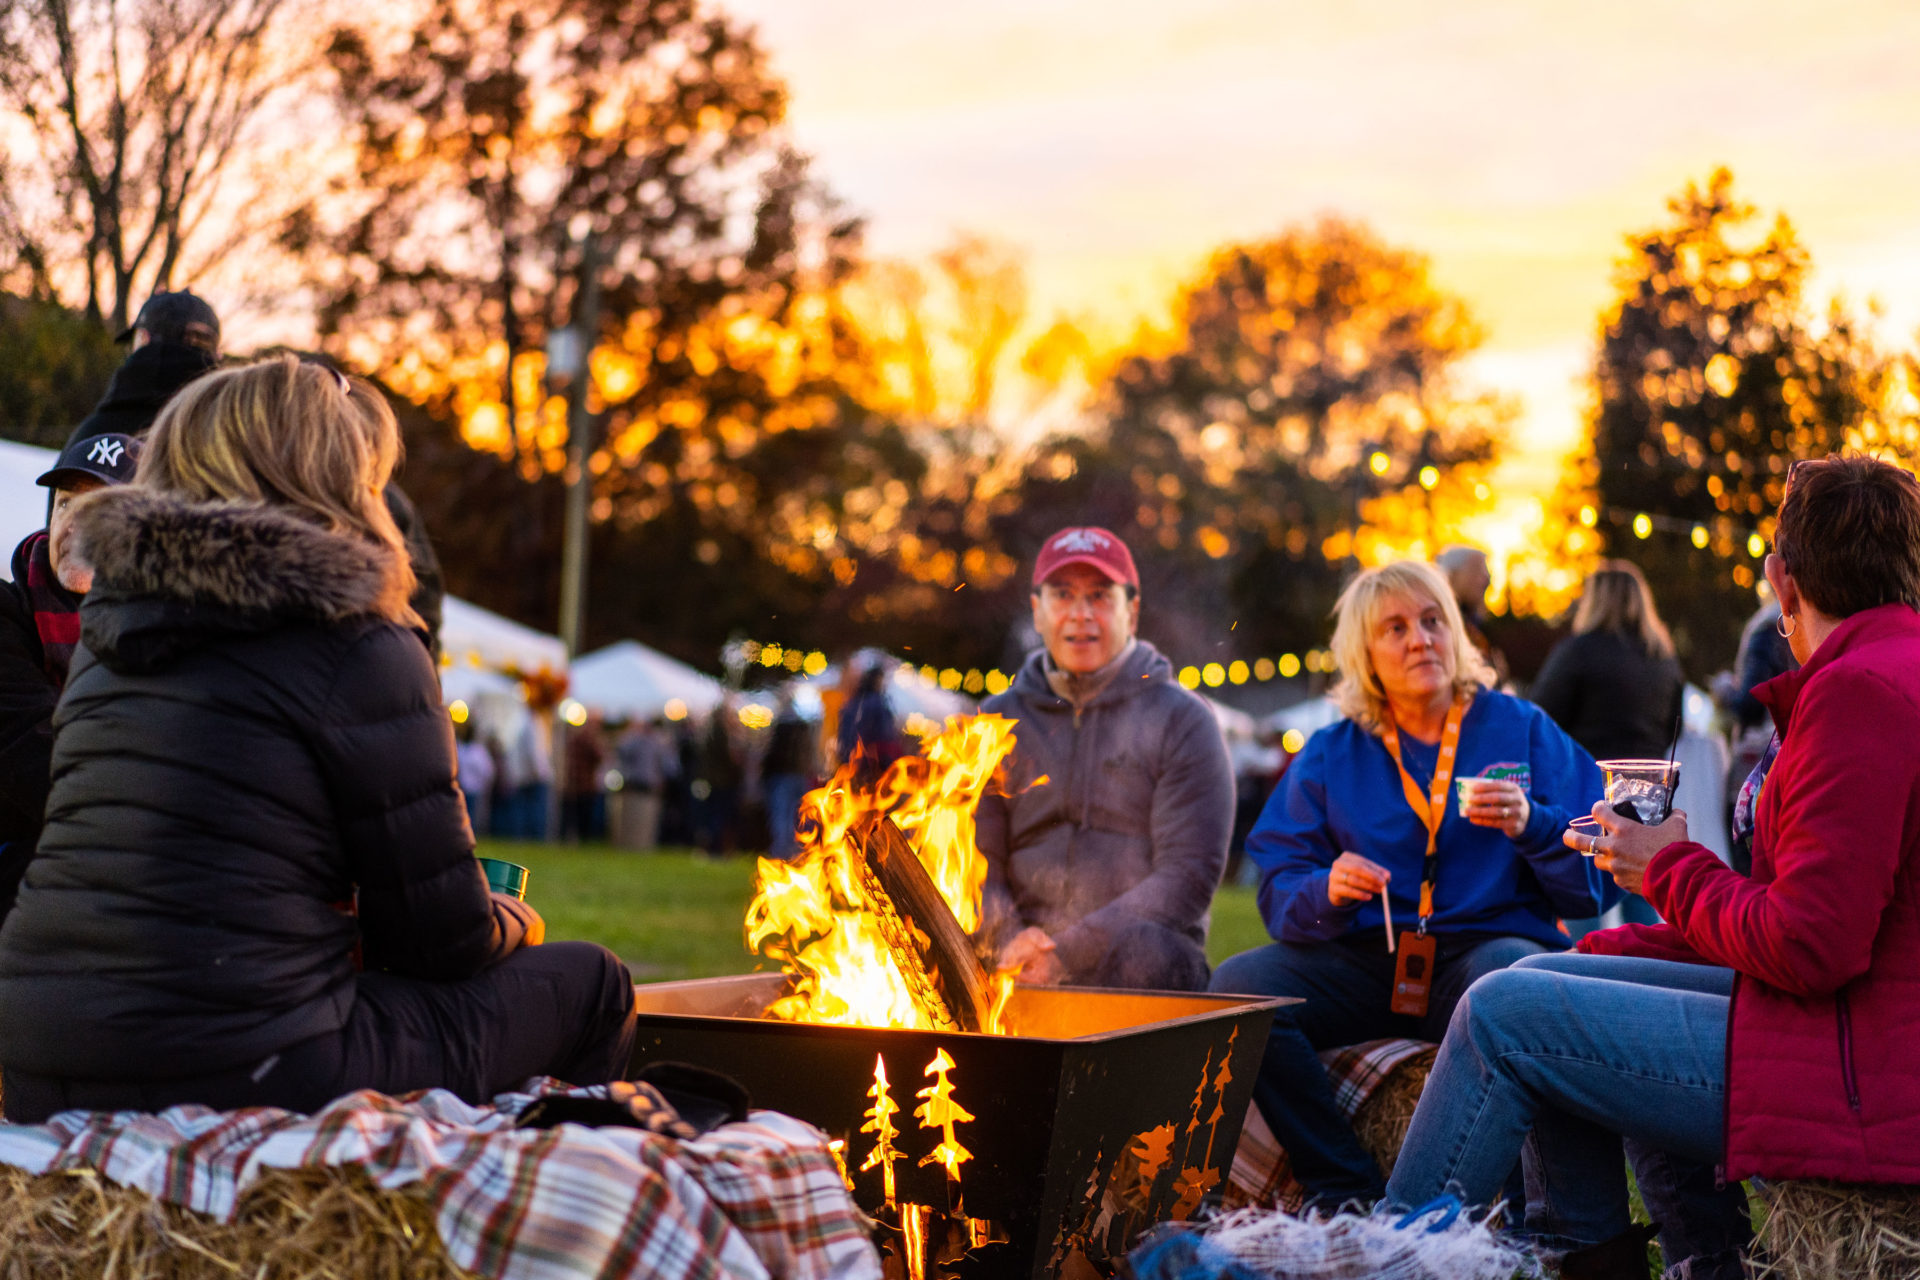 Event photography of a group of people seated around a bonfire and making conversation in Knoxville, TN.